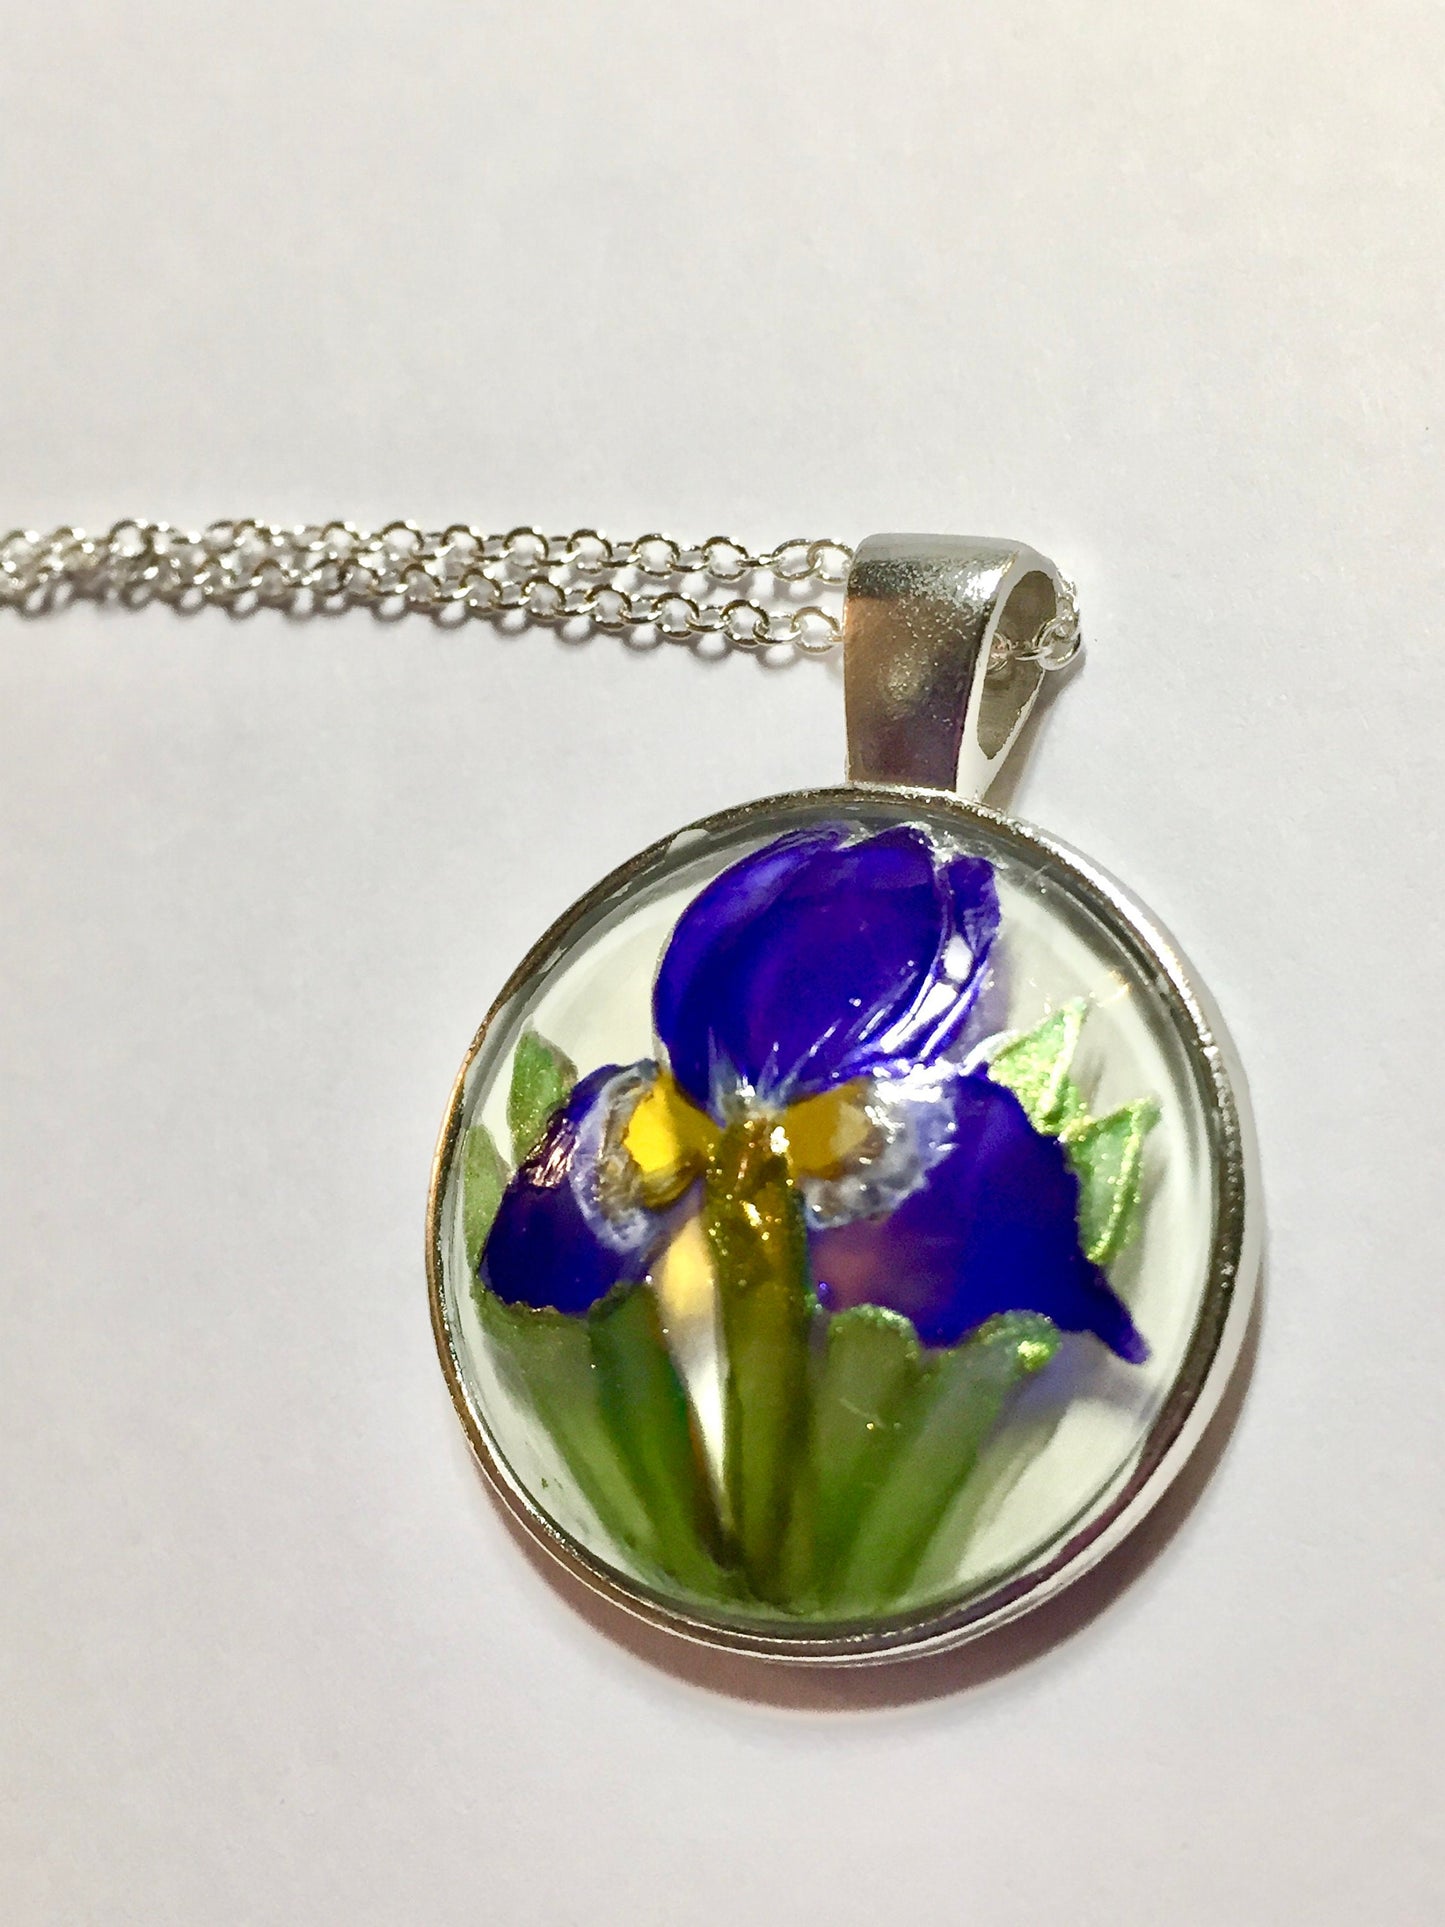 Iris hand painted glass pendant necklace